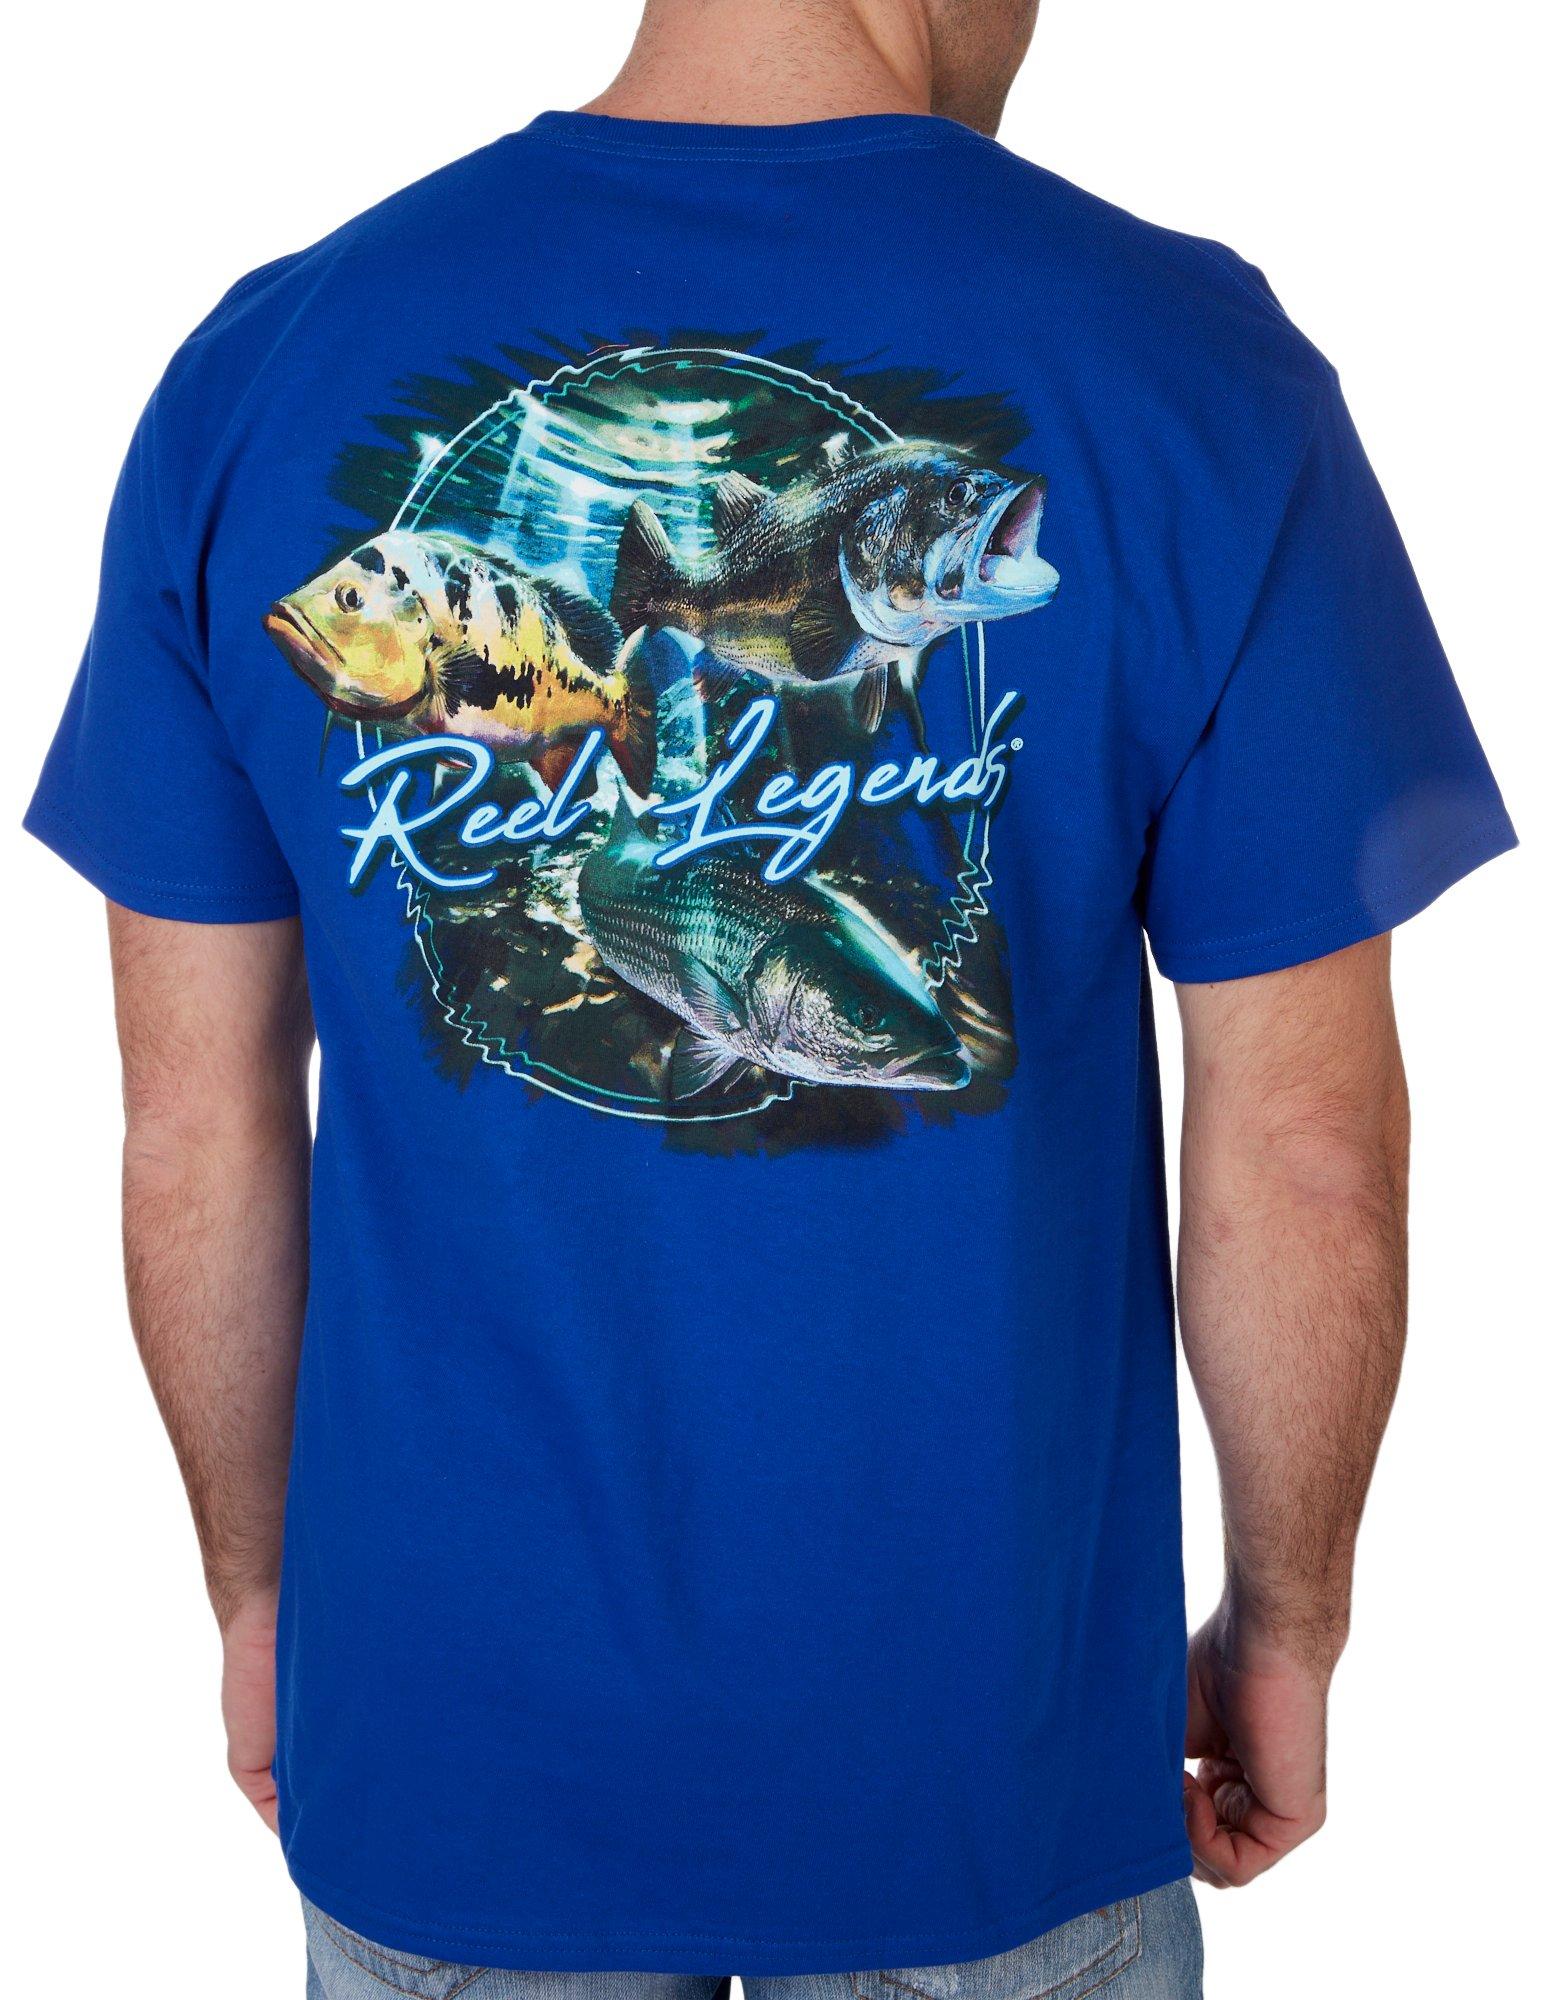 reel big fish Essential T-Shirt for Sale by ServiceHoneyAl